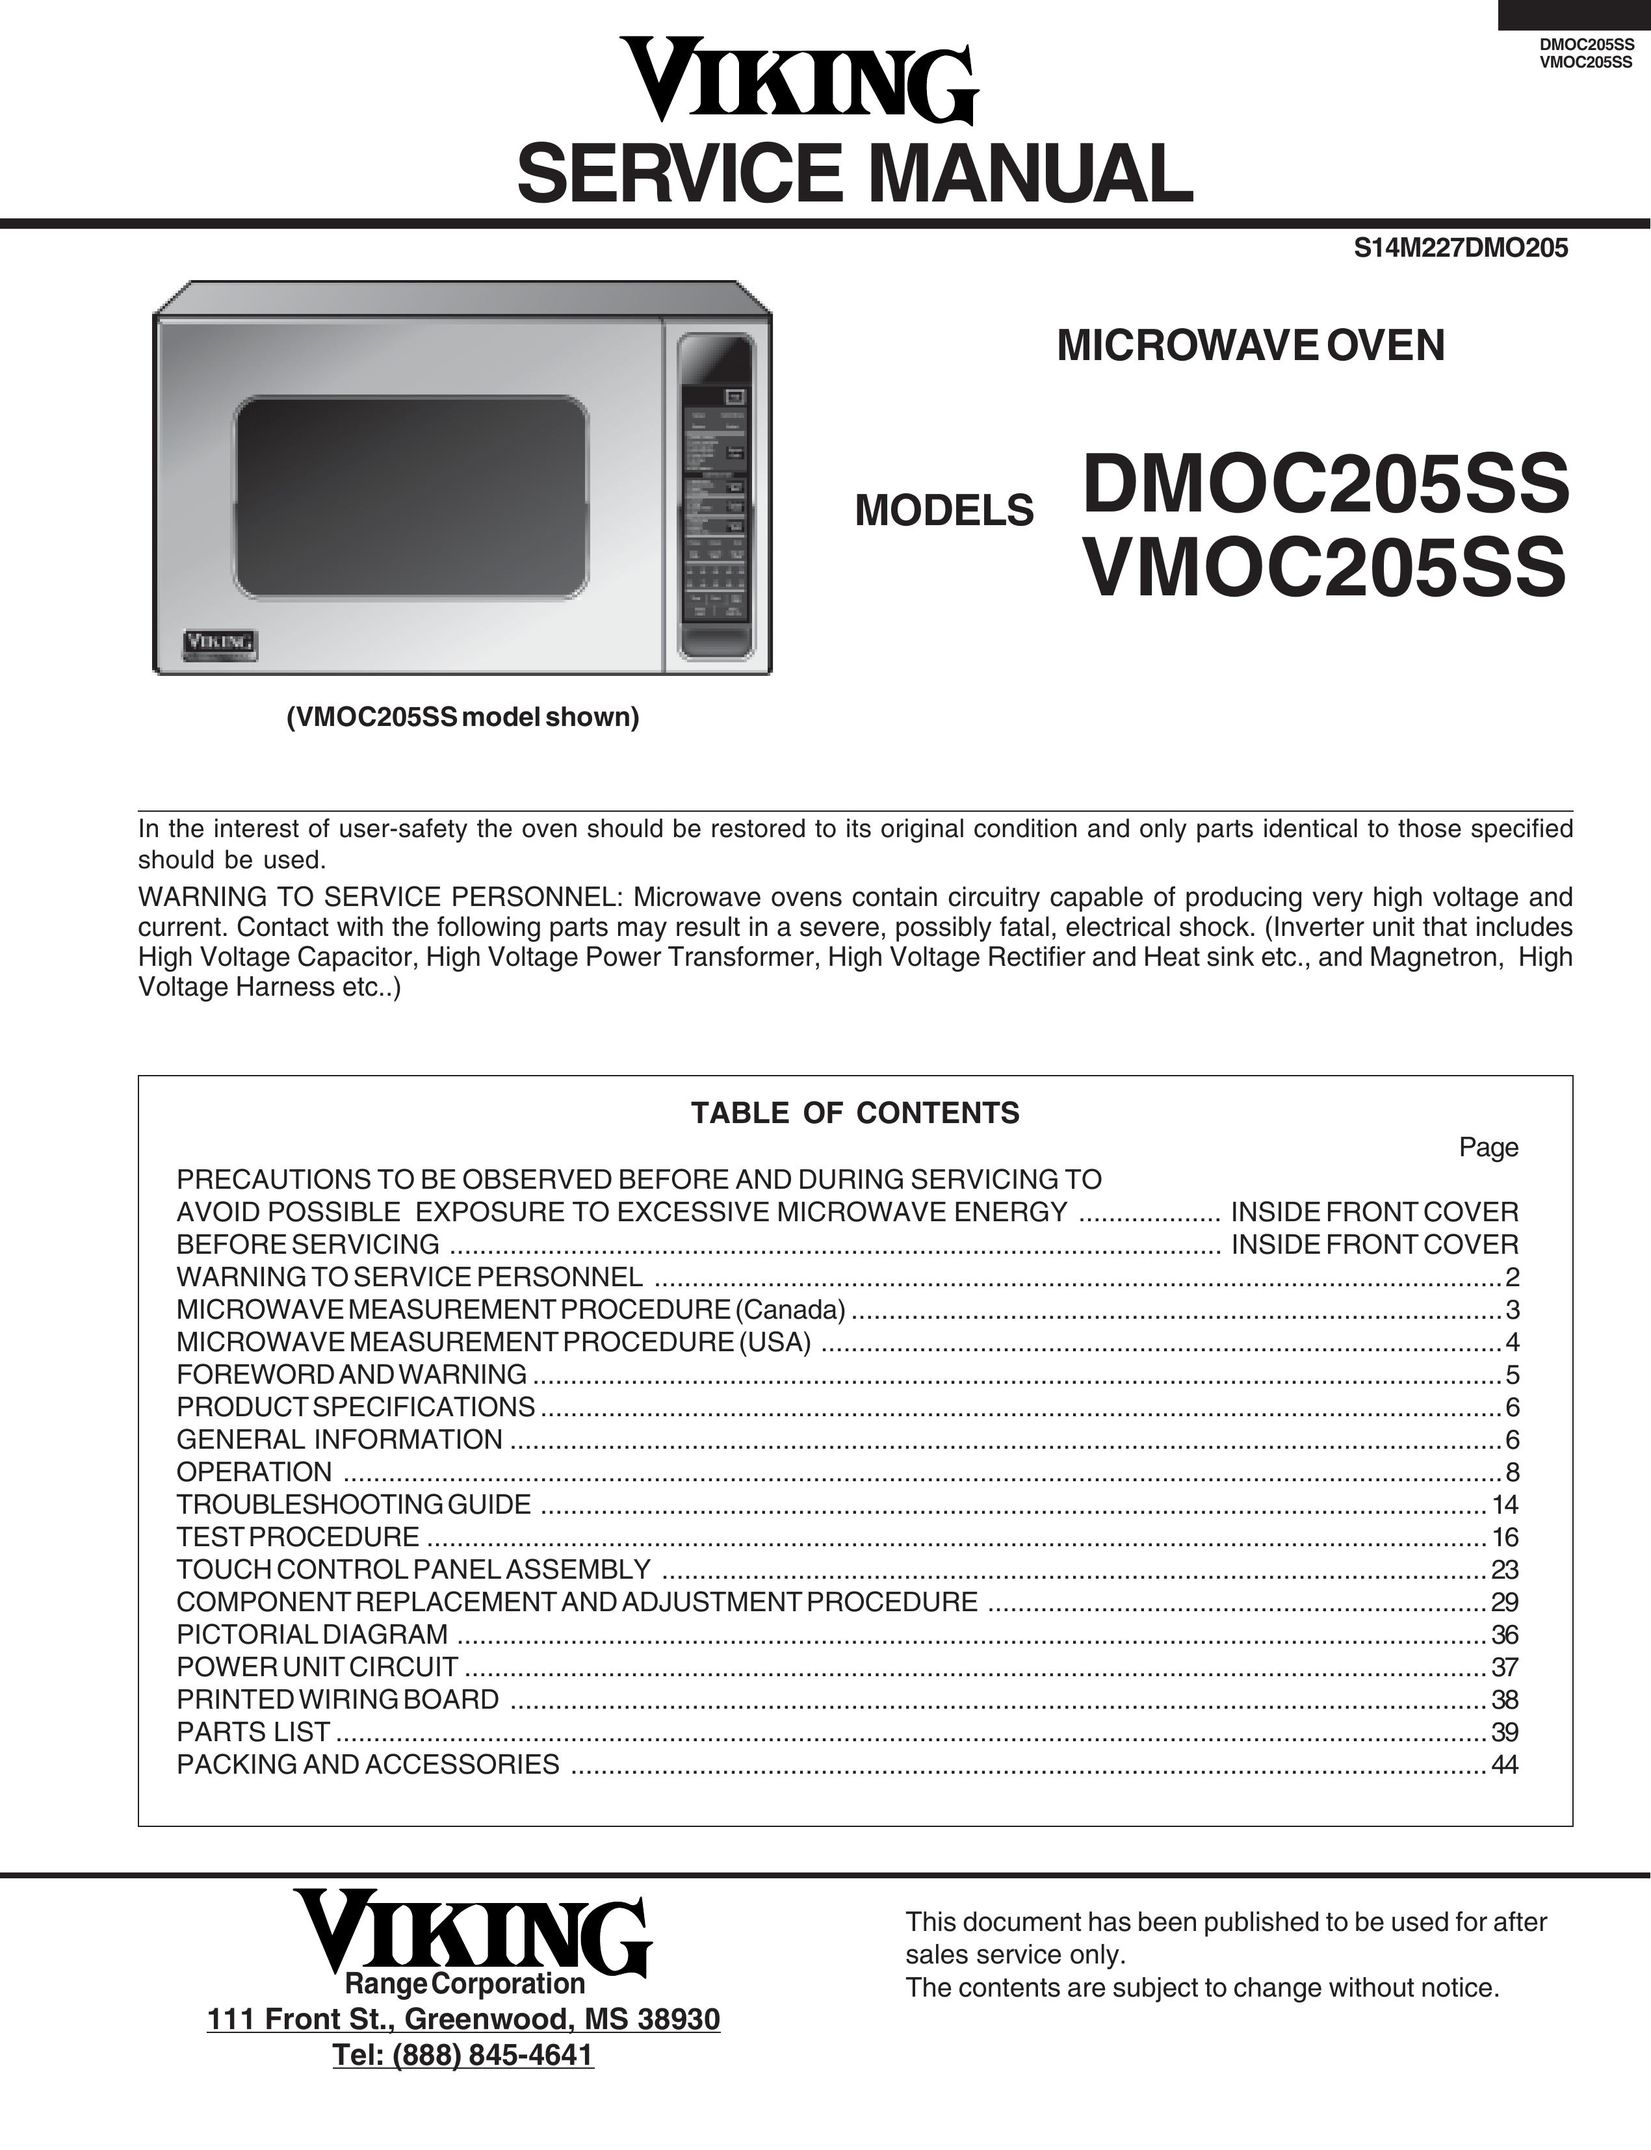 Viking DMOC205SS Microwave Oven User Manual